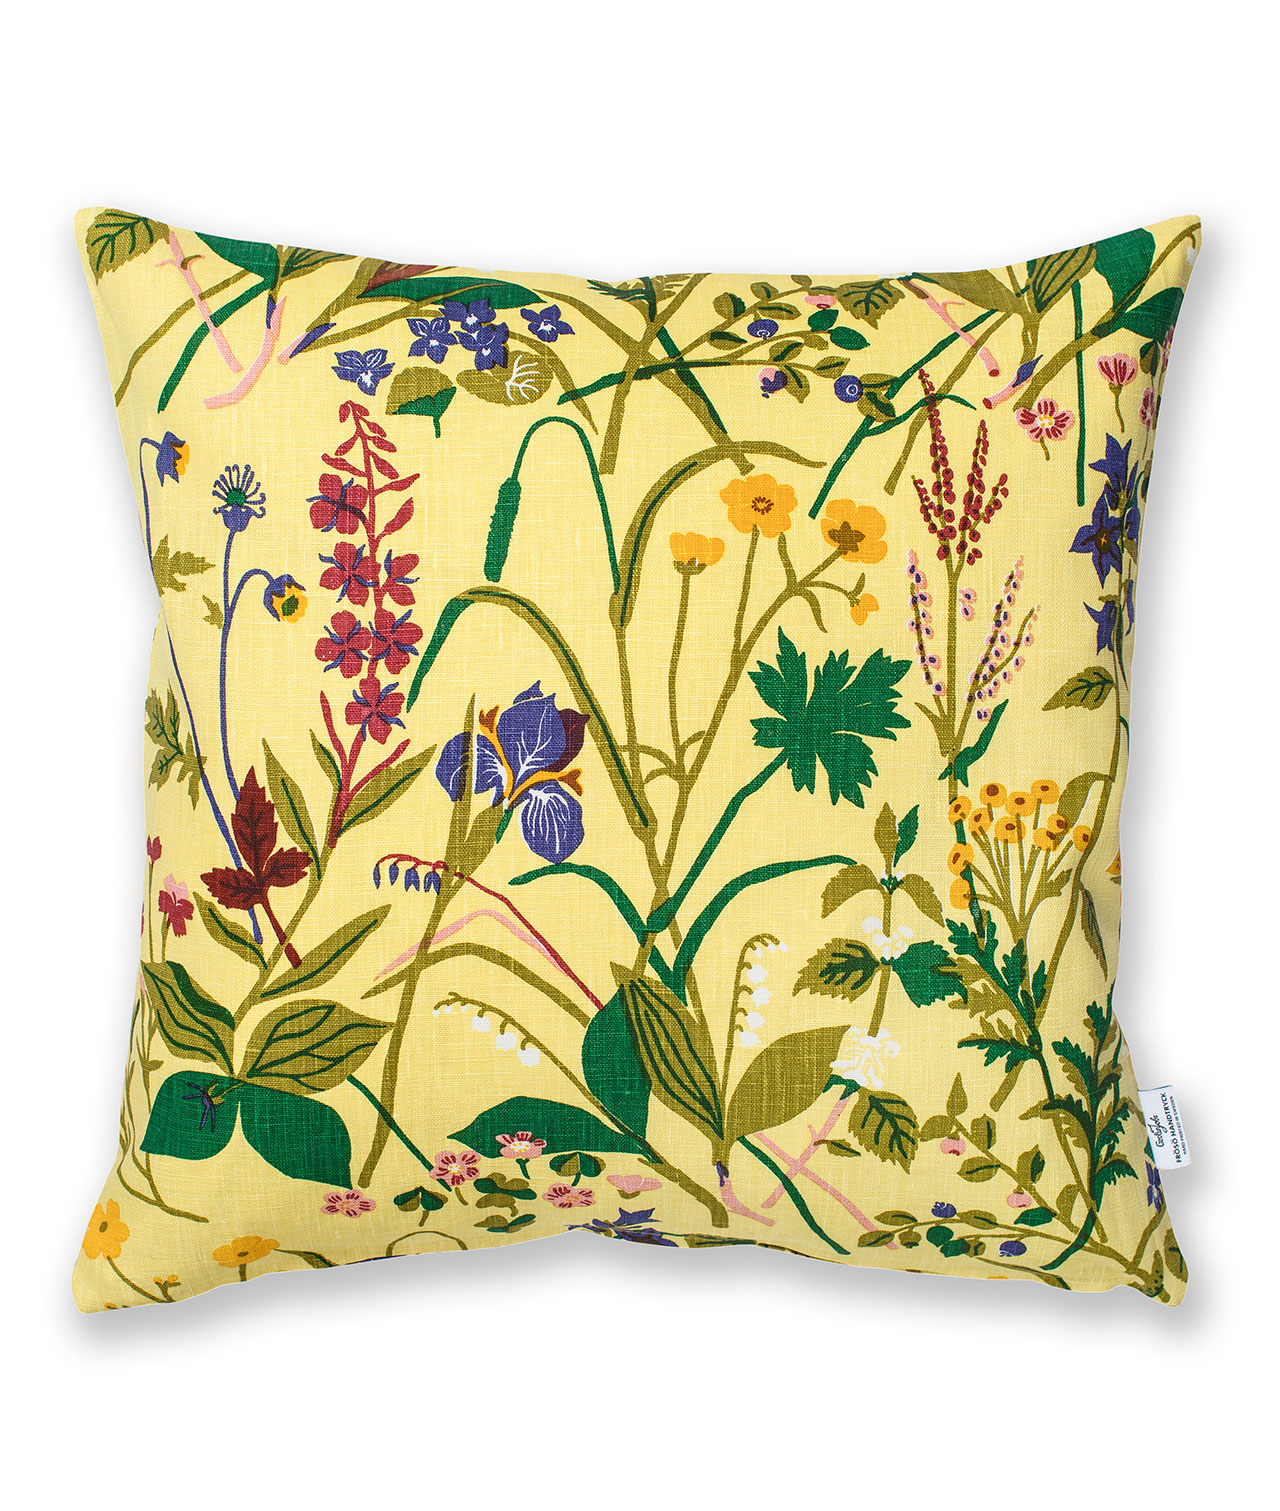 "ROS & LILJA" 50x50 Linen Yellow -Cushion cover only